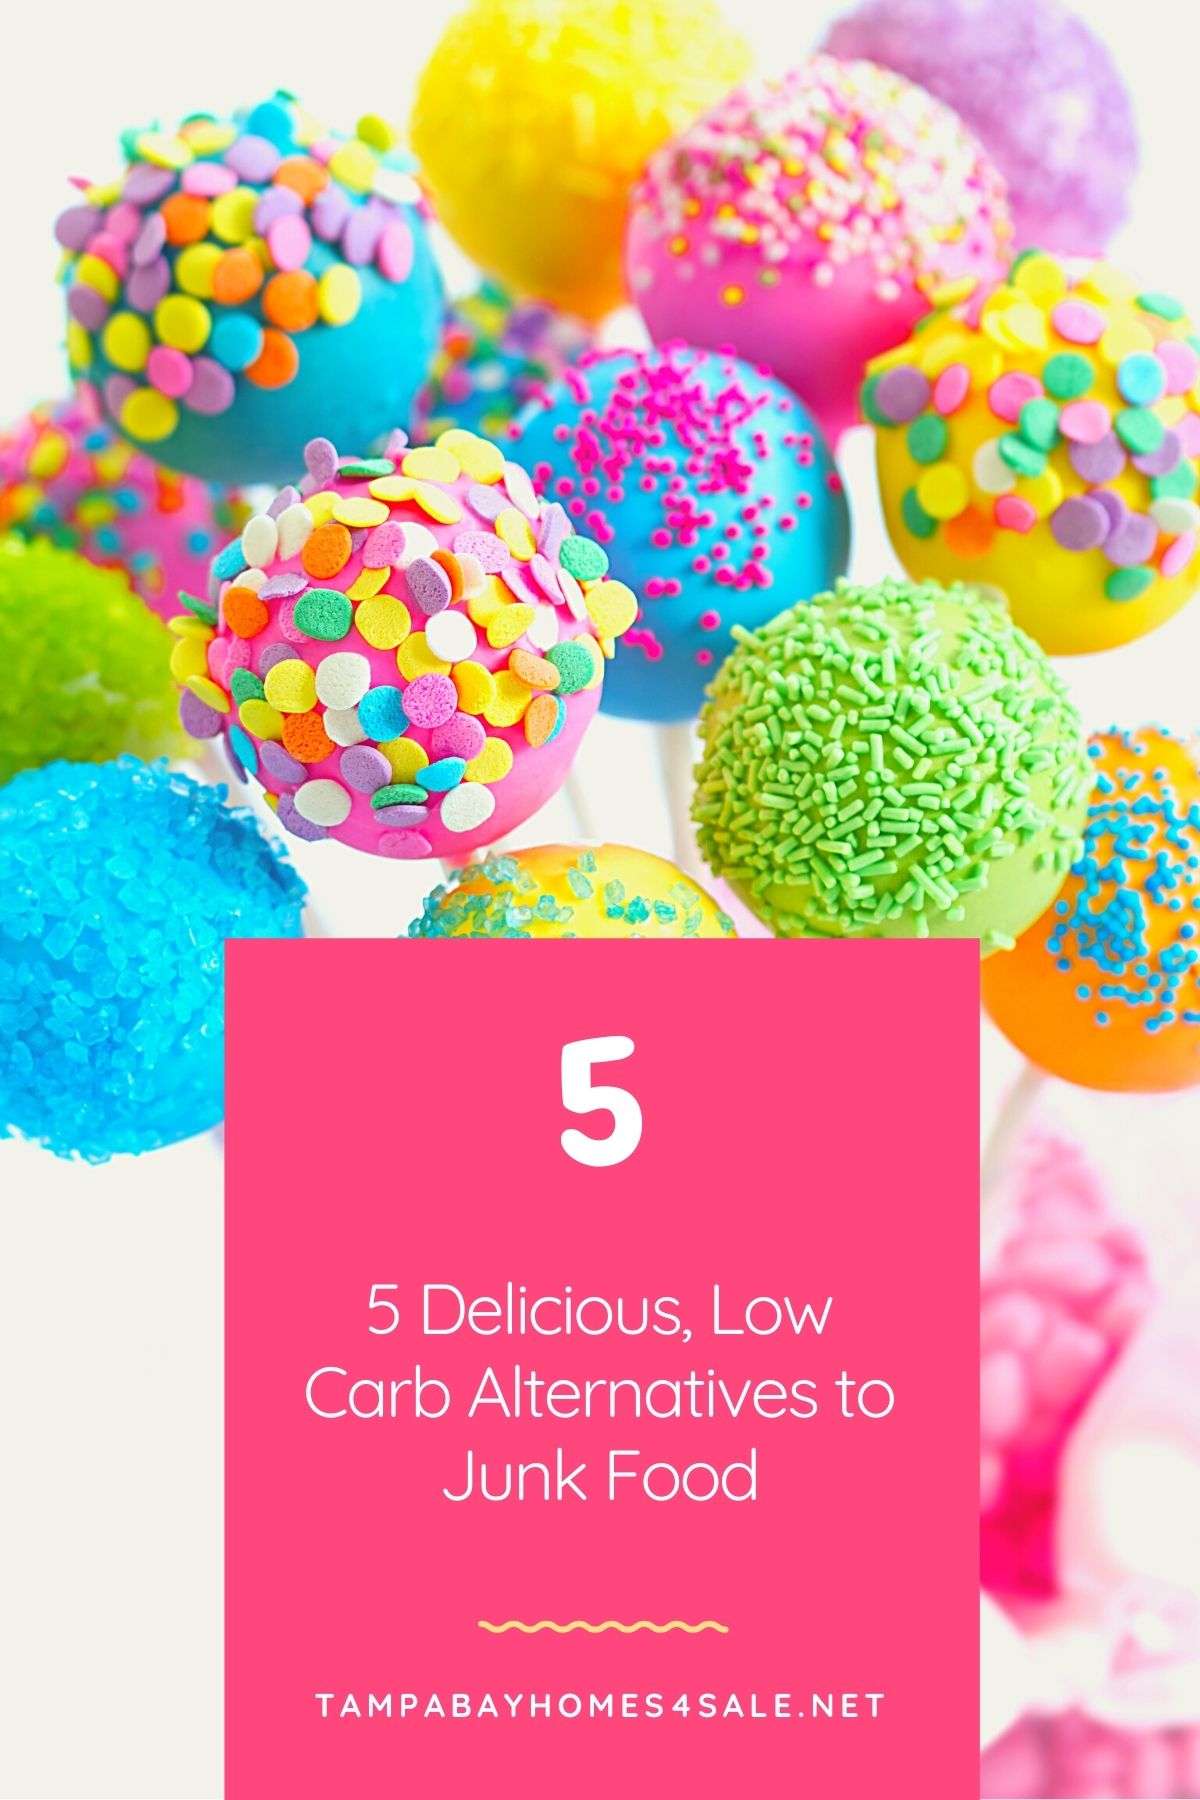 5 Delicious, Low Carb Alternatives to Junk Food